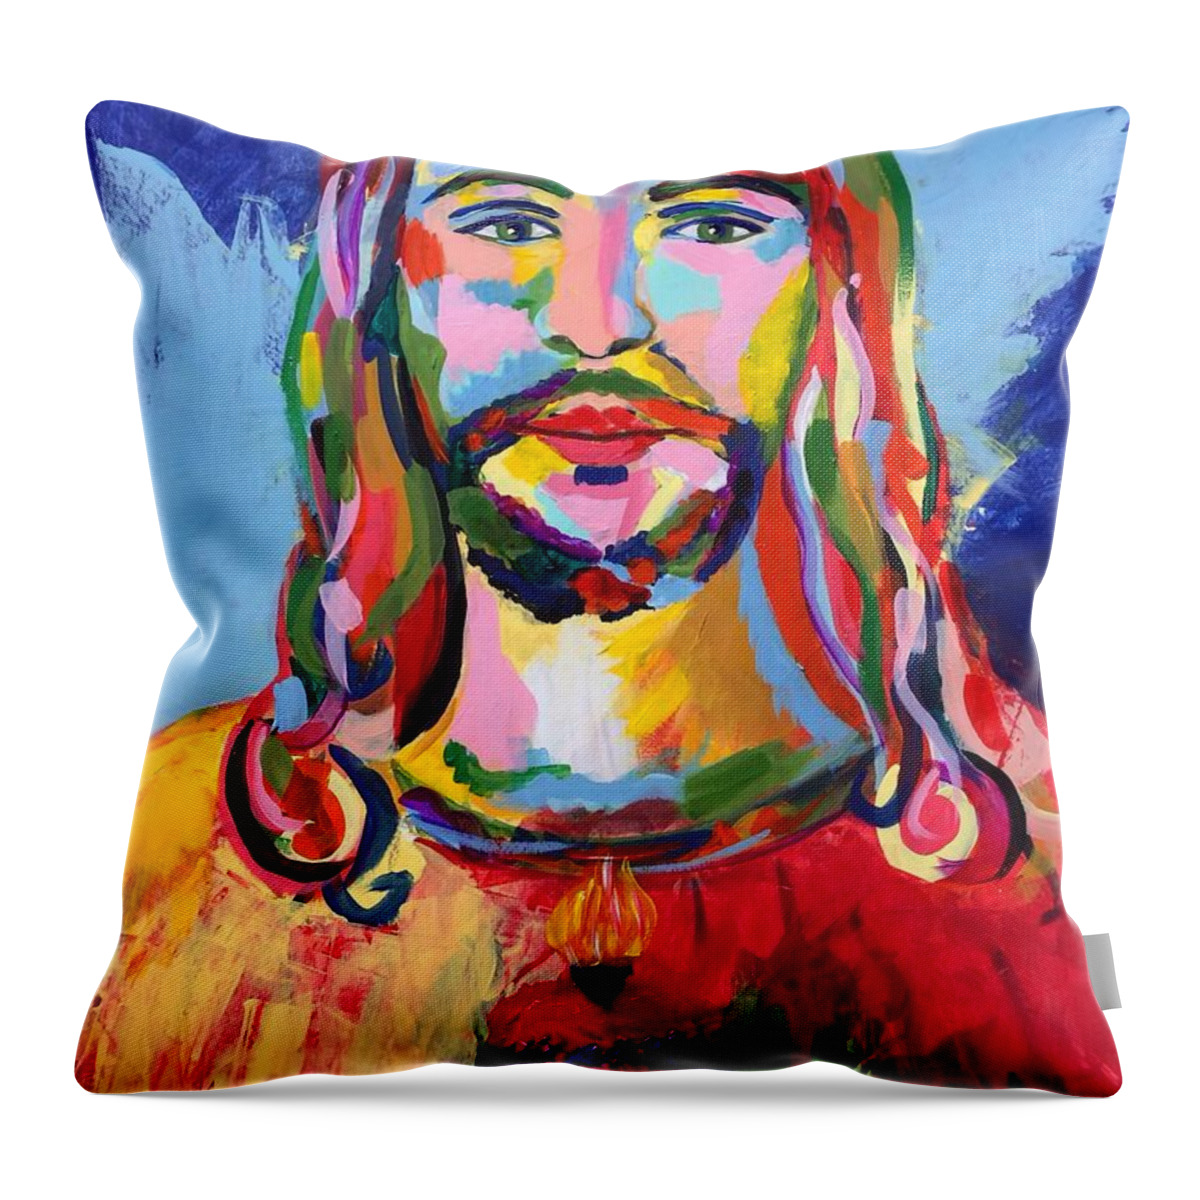 Jesuschrist Throw Pillow featuring the painting Jesuschrist Jesucristo Jesus Christ by Luzdy Rivera